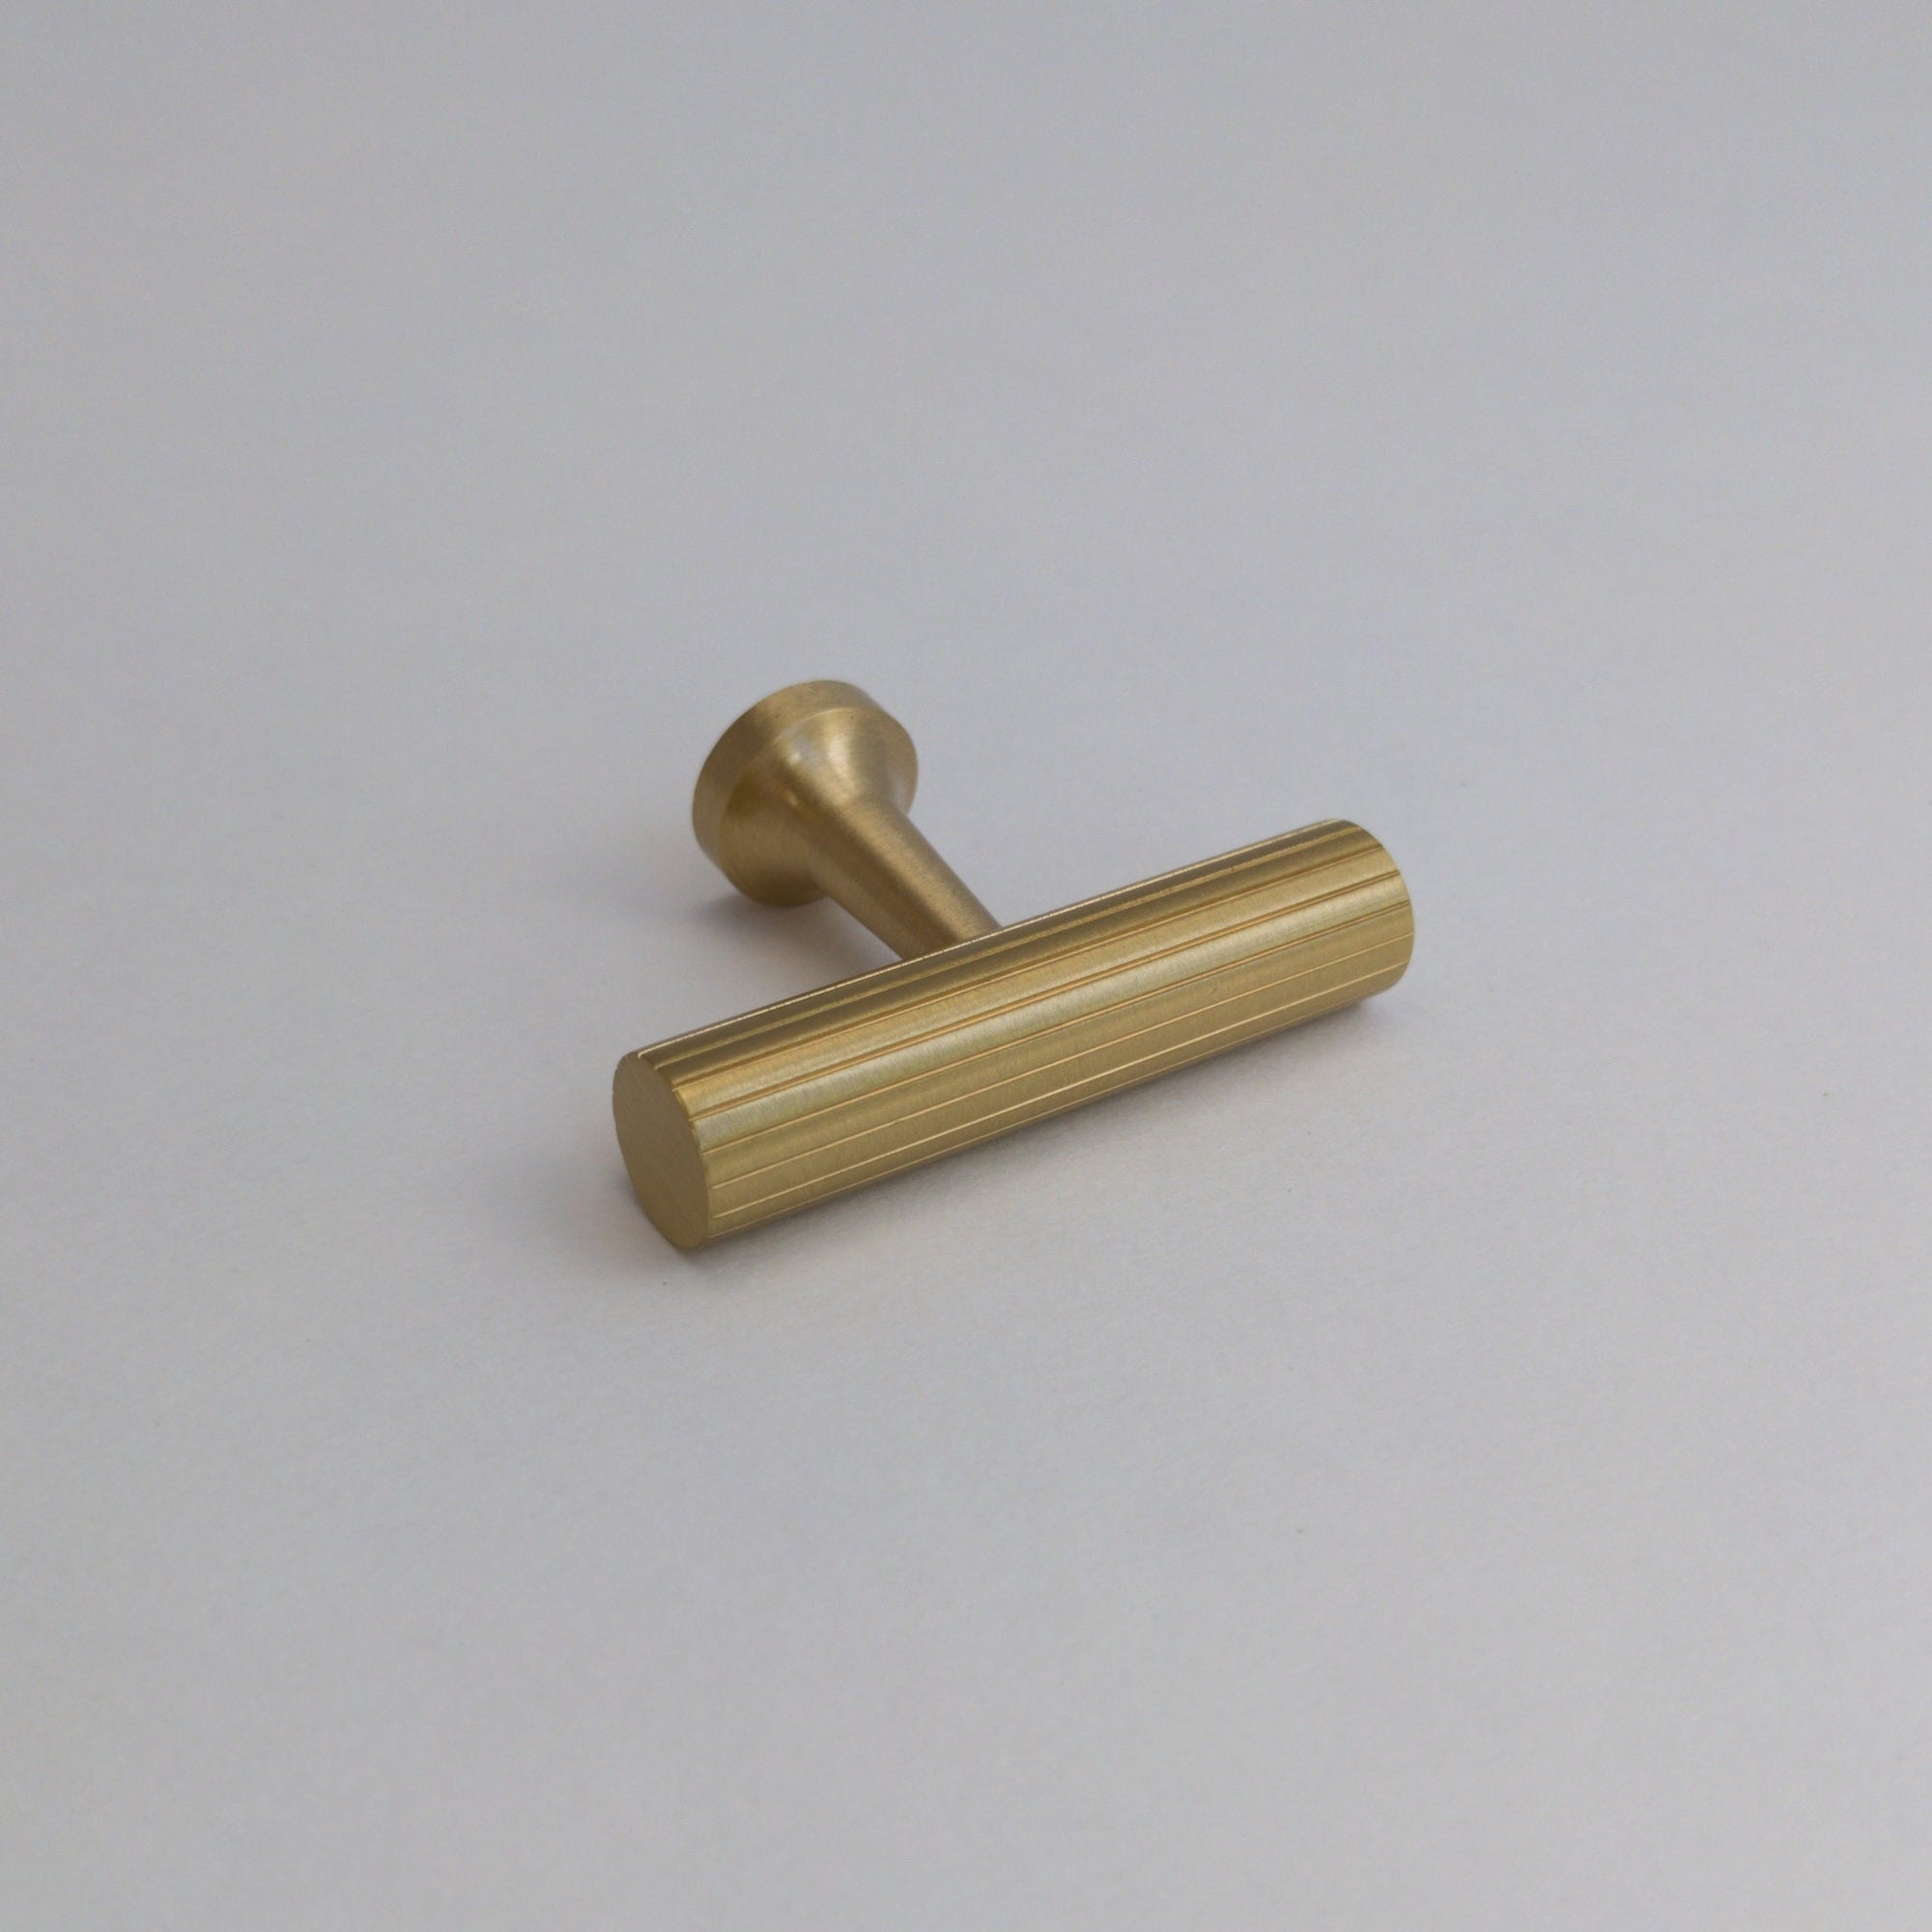 Fluted Brass Gold T-Bar Knob - Cabinet Pulls and Drawer Handles, Brushed Gold  Finish,  Solid Metal,  Classic Drawer Pull Handles